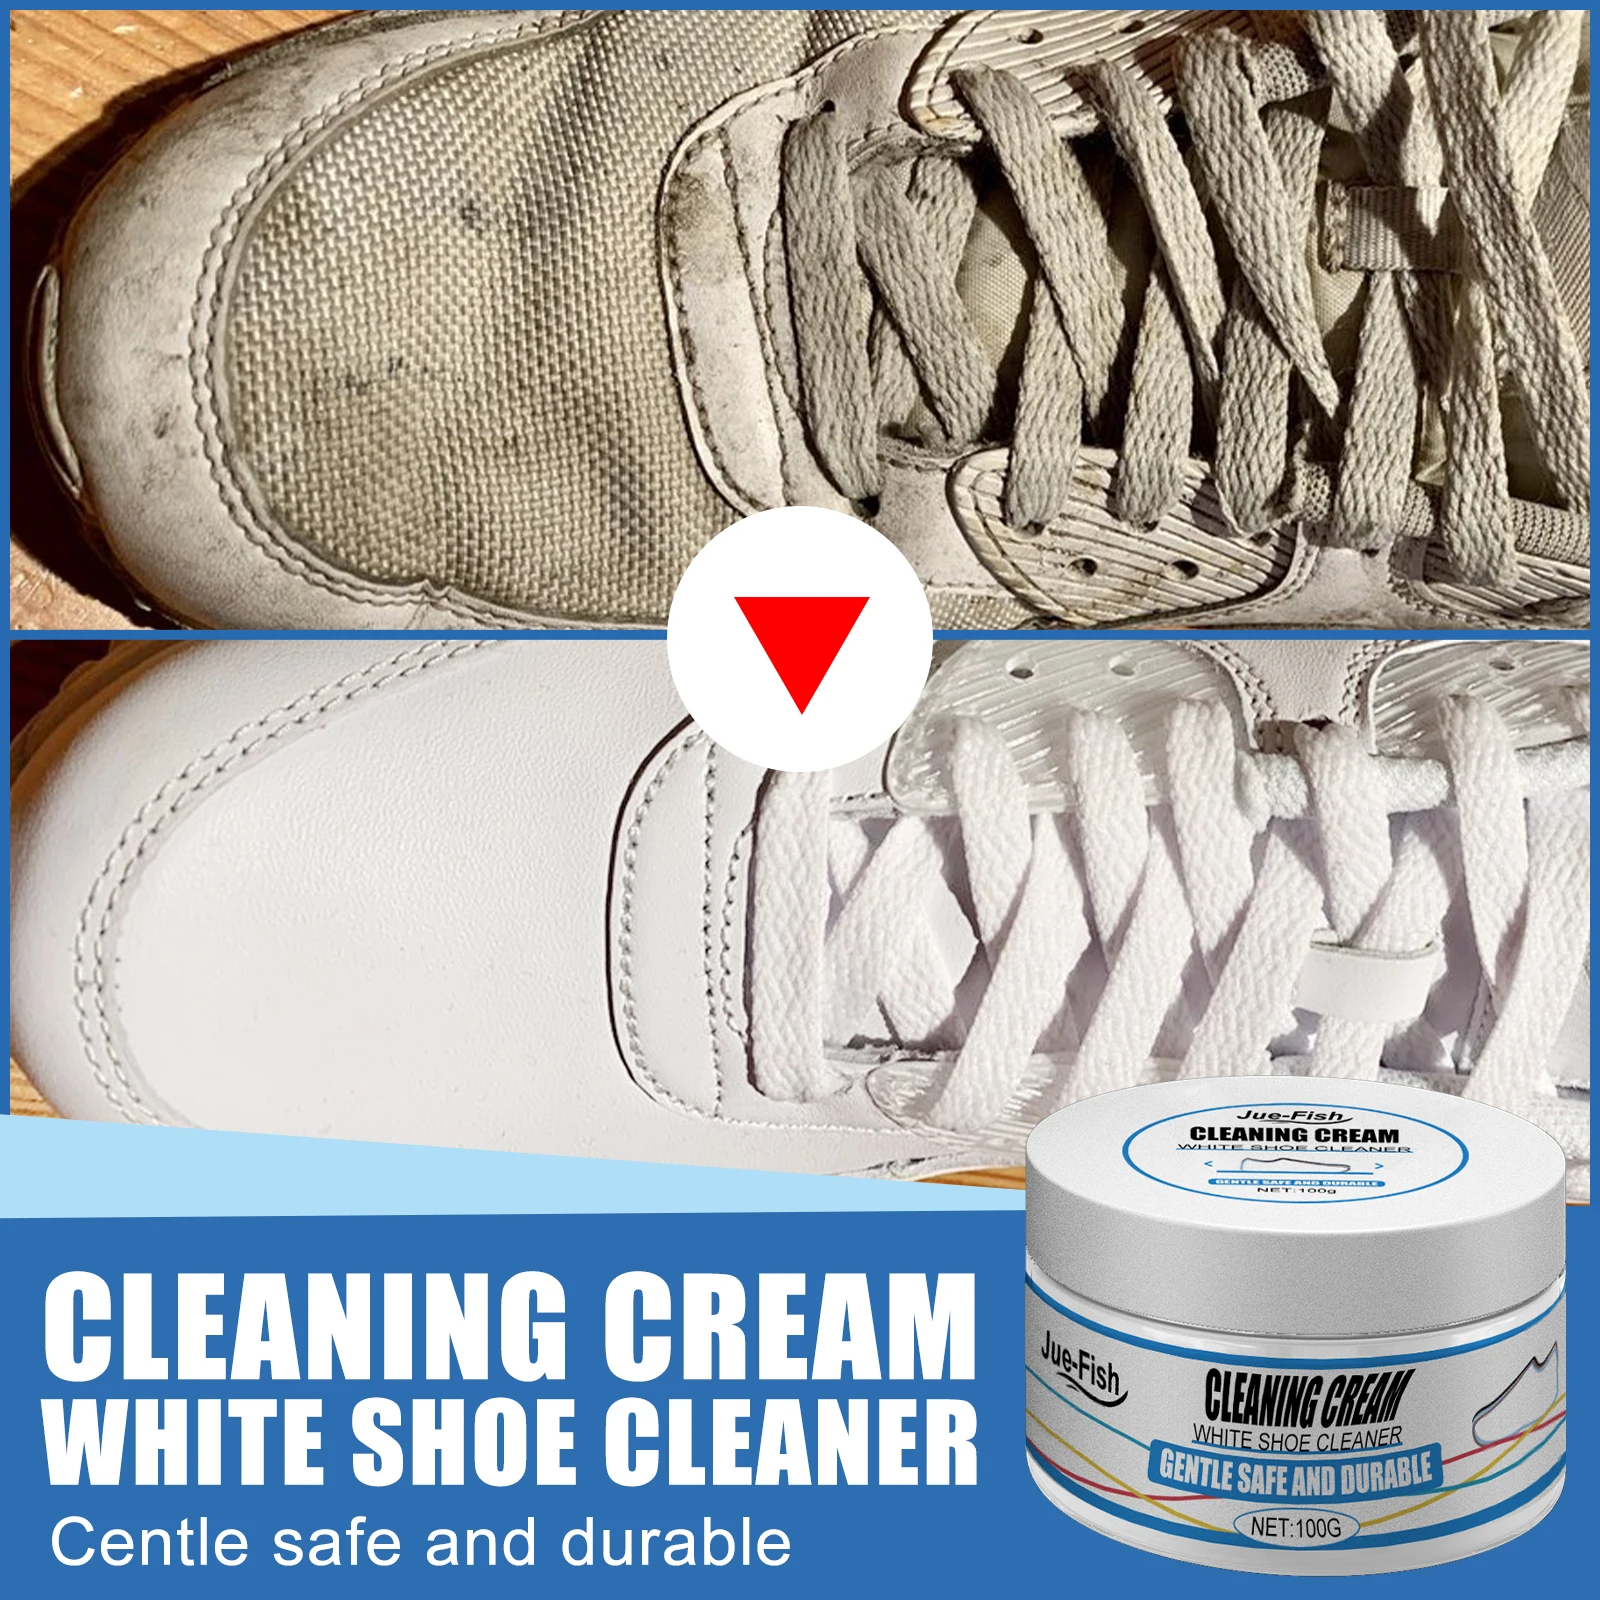 Hot Sale Modern Shoe Cleaner White Shoe Running Shoes Cleaning Cream ...